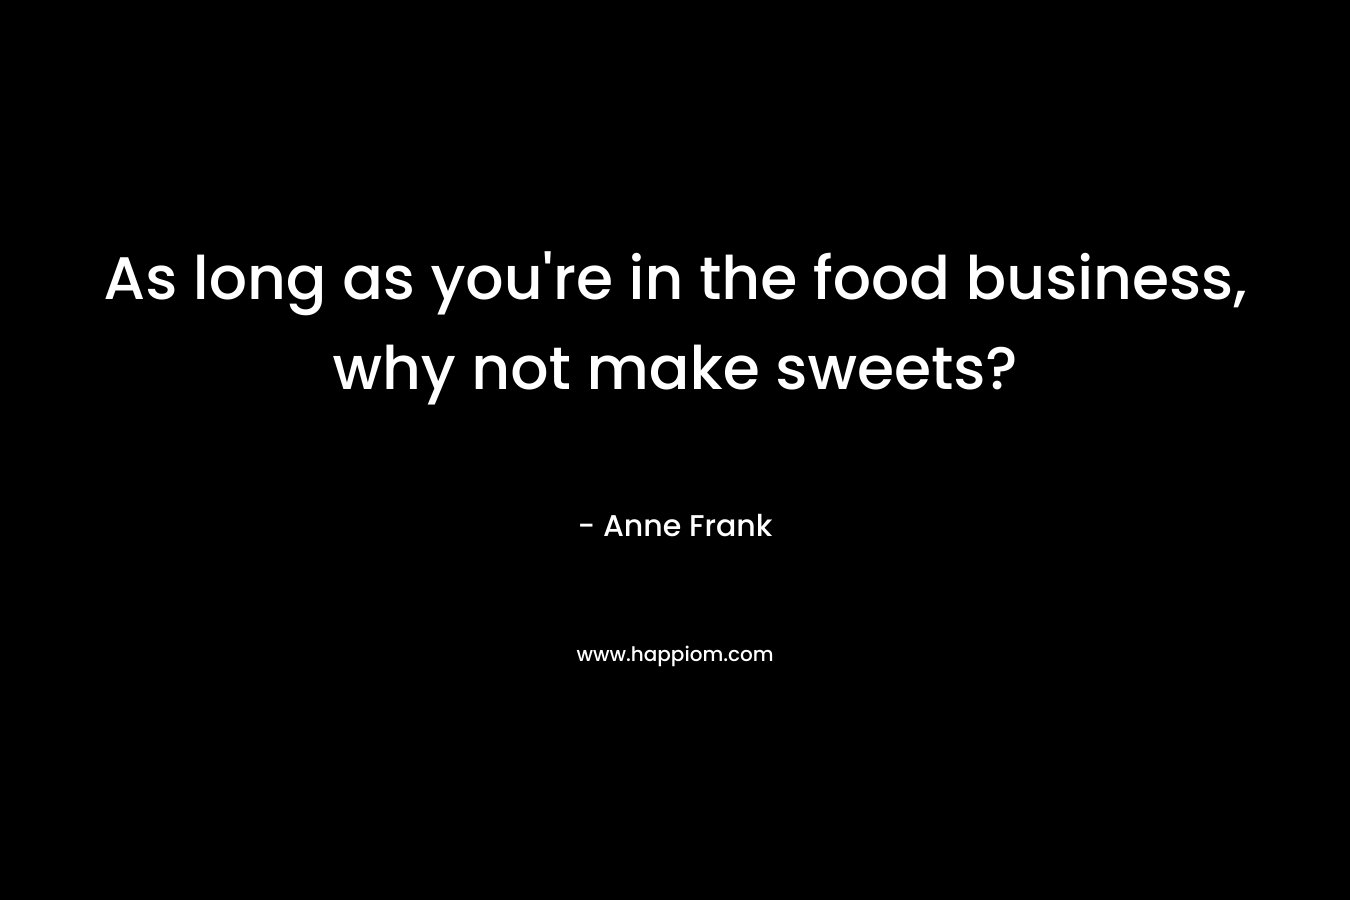 As long as you’re in the food business, why not make sweets? – Anne Frank